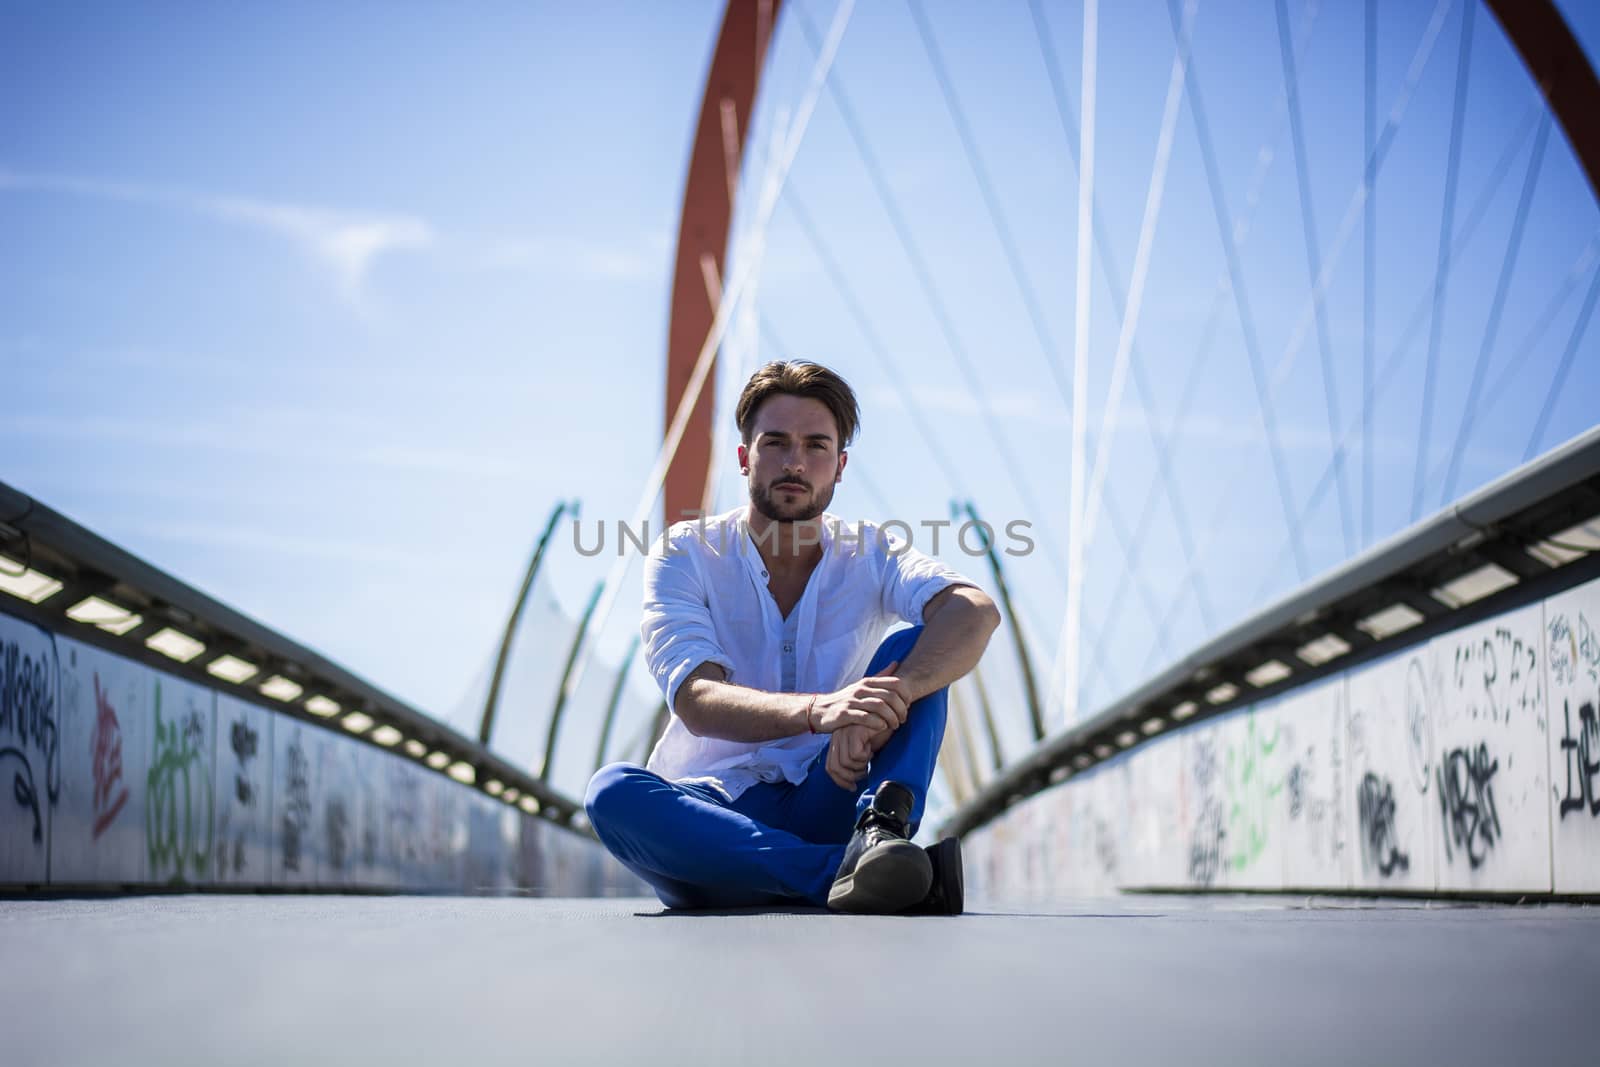 One handsome young man in urban setting in European city, sitting on the ground